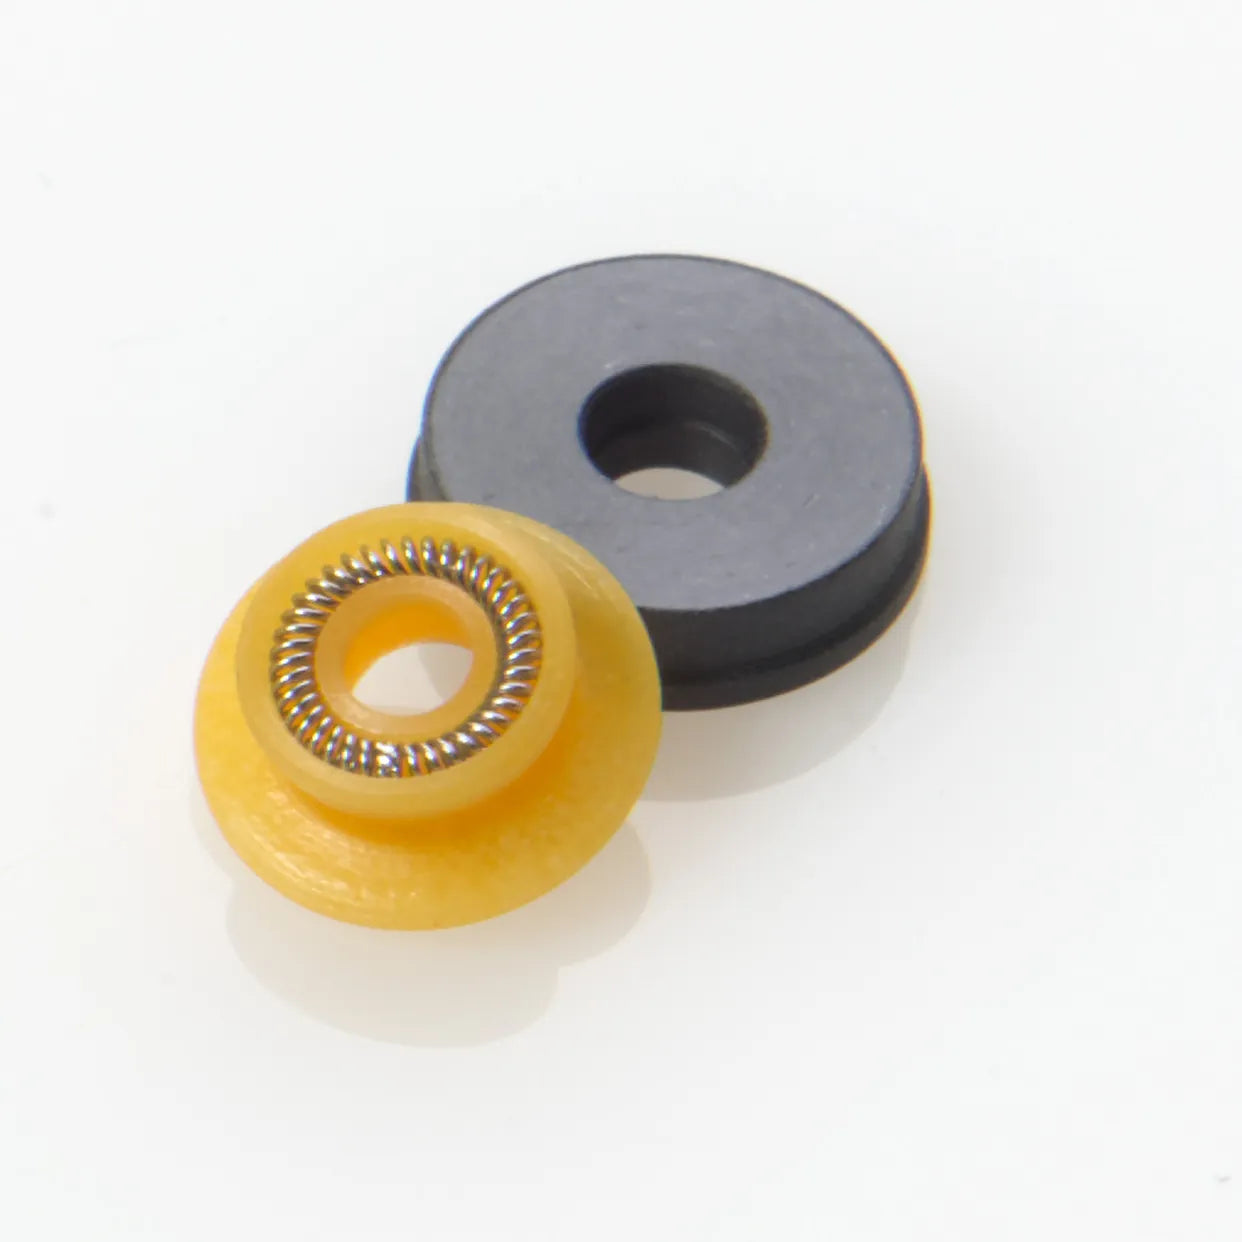 Plunger Seal and Back Up Ring, Comparable to Shimadzu # 228-52711-93, Old # 228-52711-92, 5050410(Sciex™)